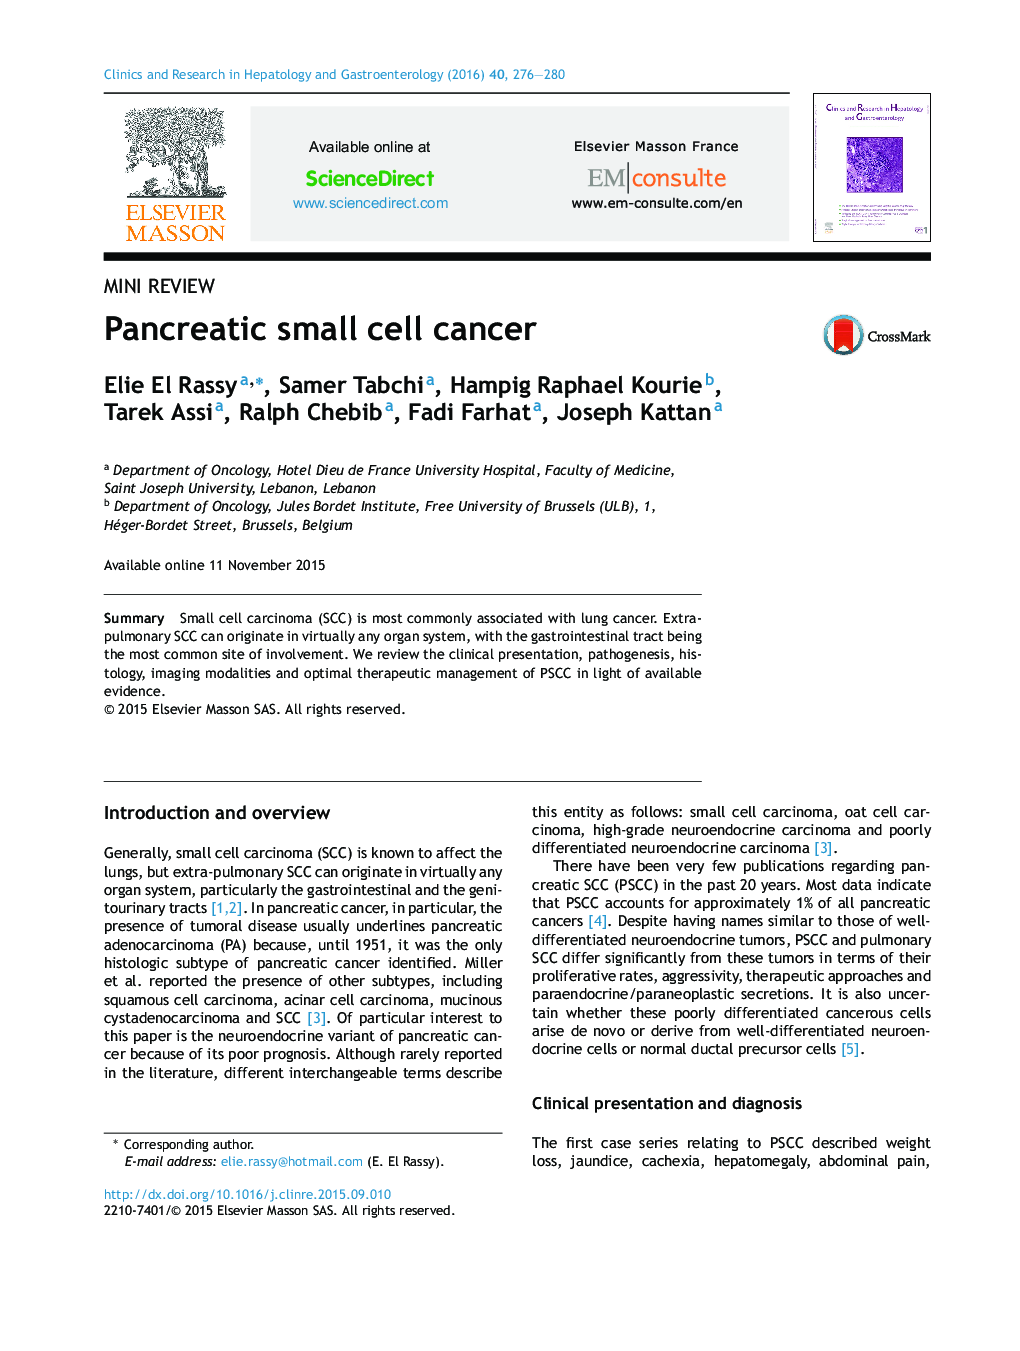 Pancreatic small cell cancer